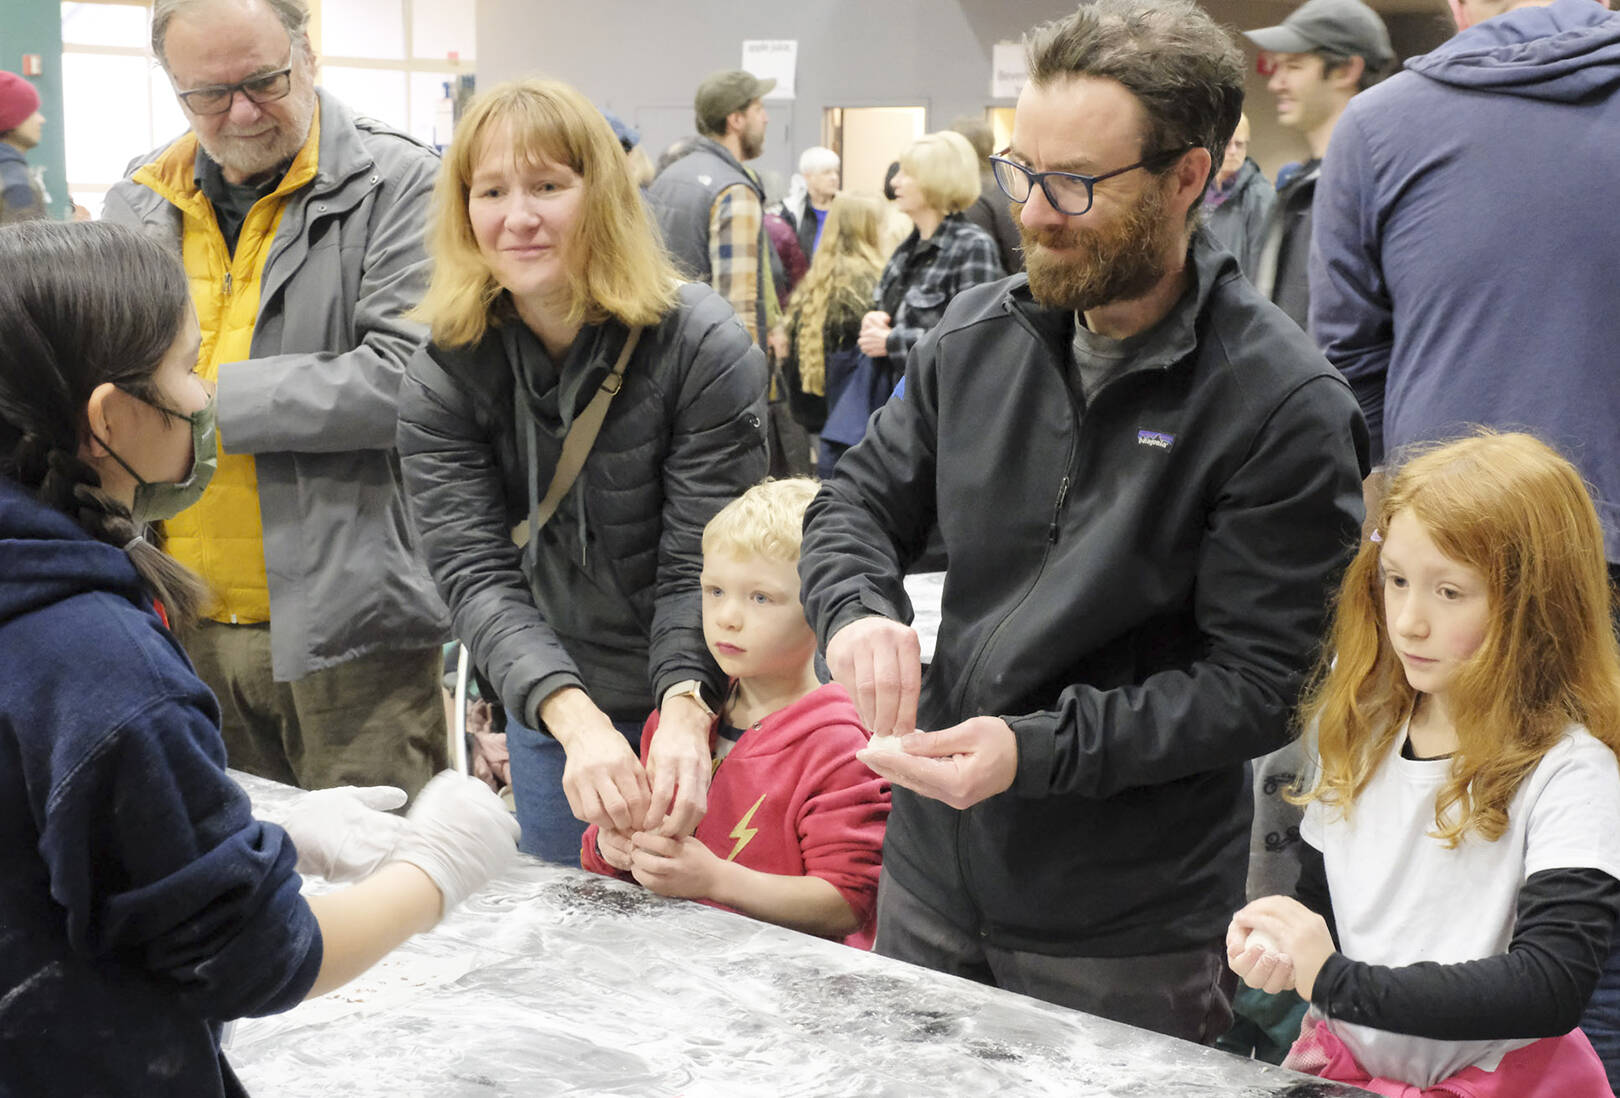 People of all ages enjoy the event through hands-on activities like molding the mochi dough.